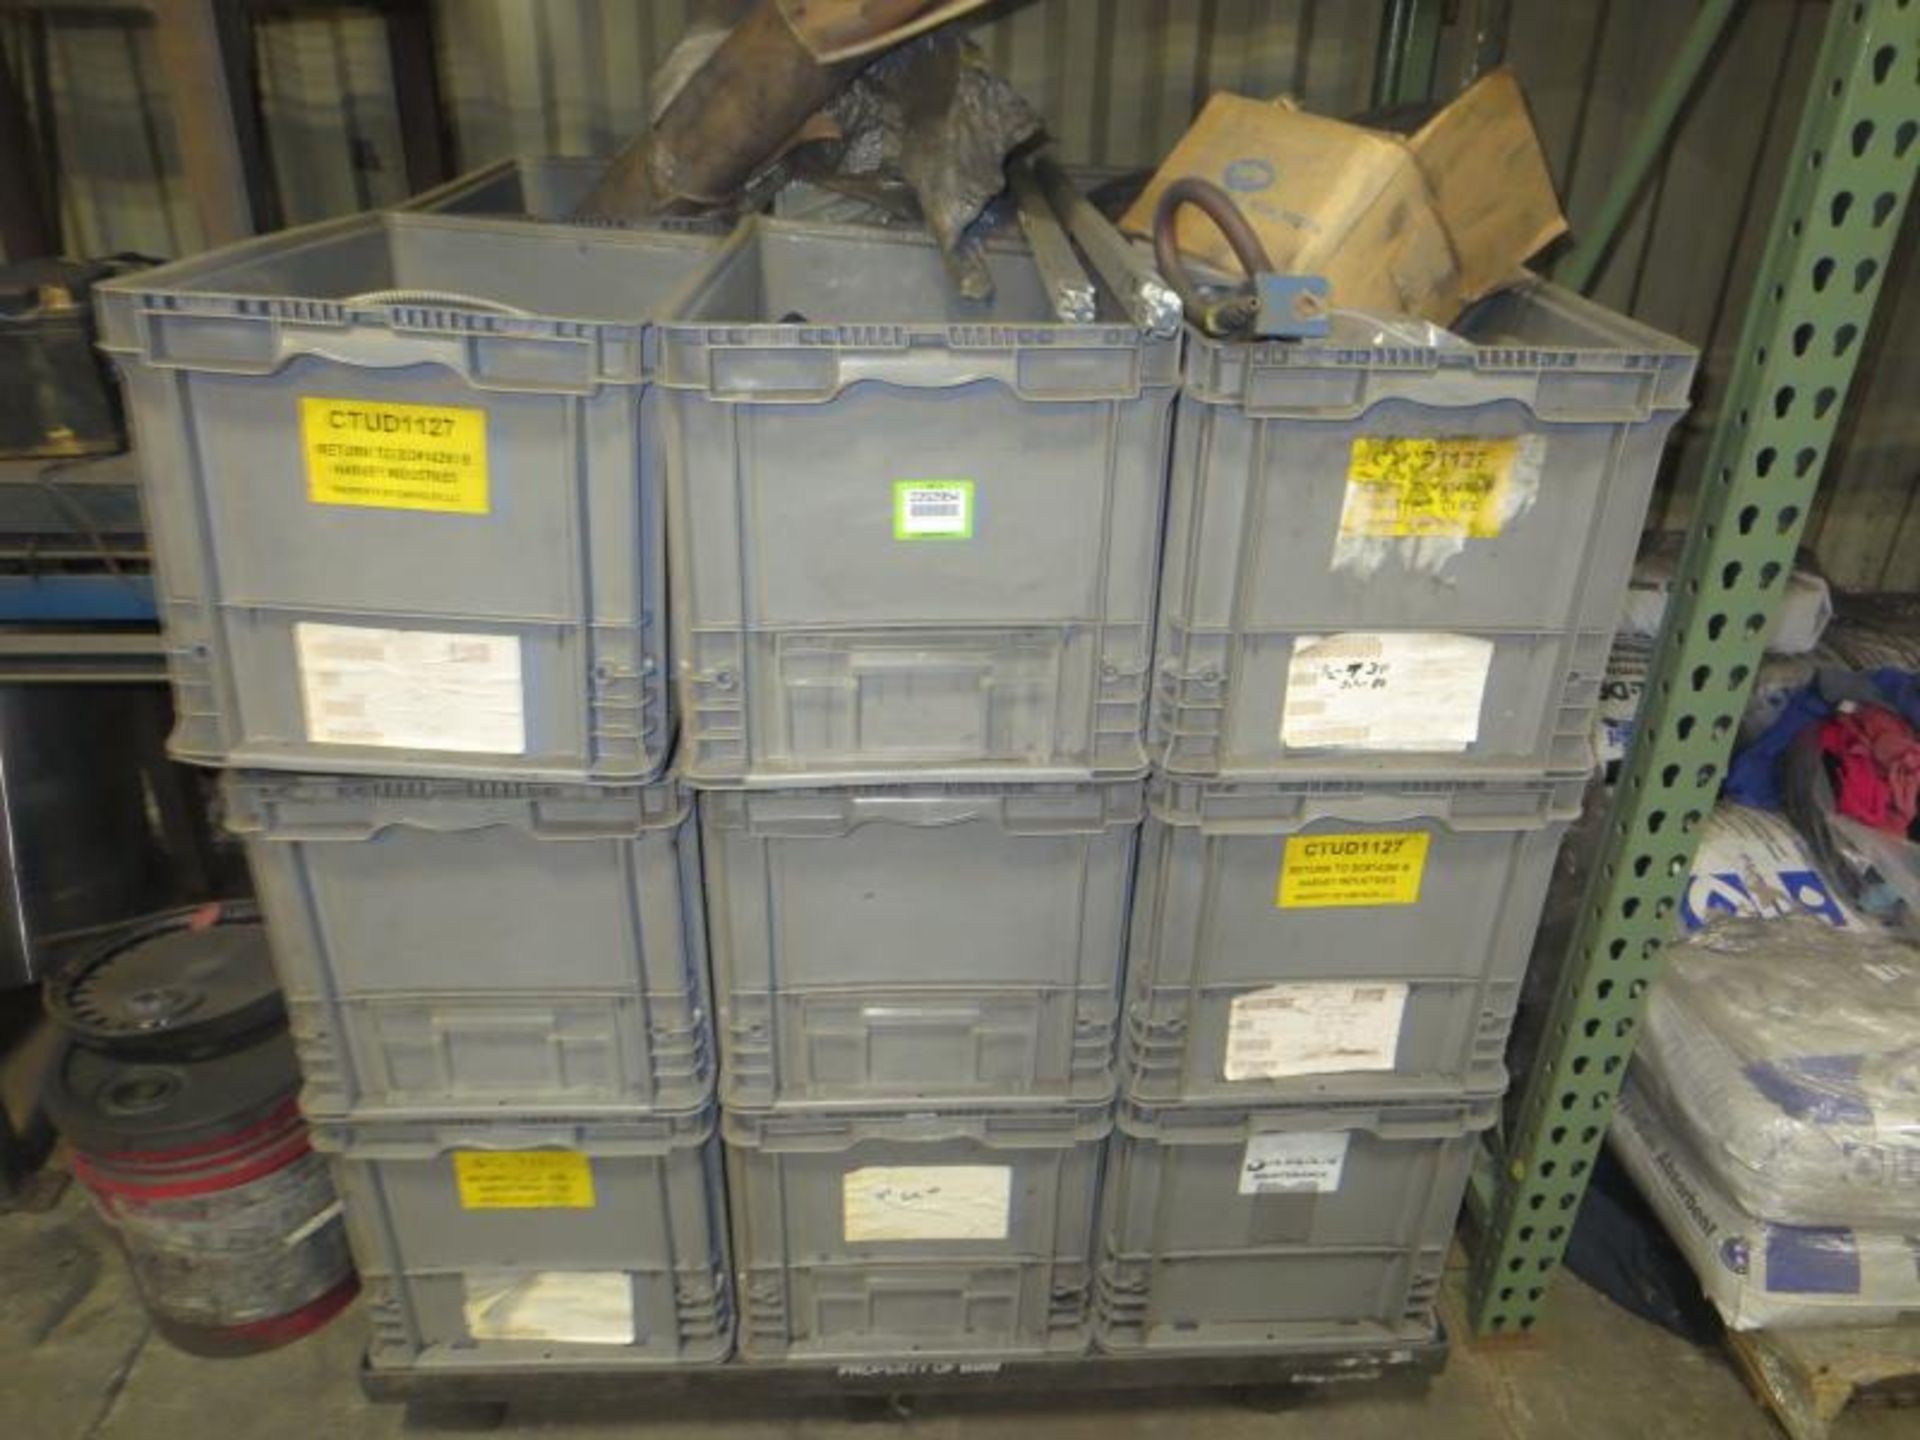 Assorted Parts. Lot 1 Skid 18 totes with parts, Keyence light curtains, conduit, Vibration